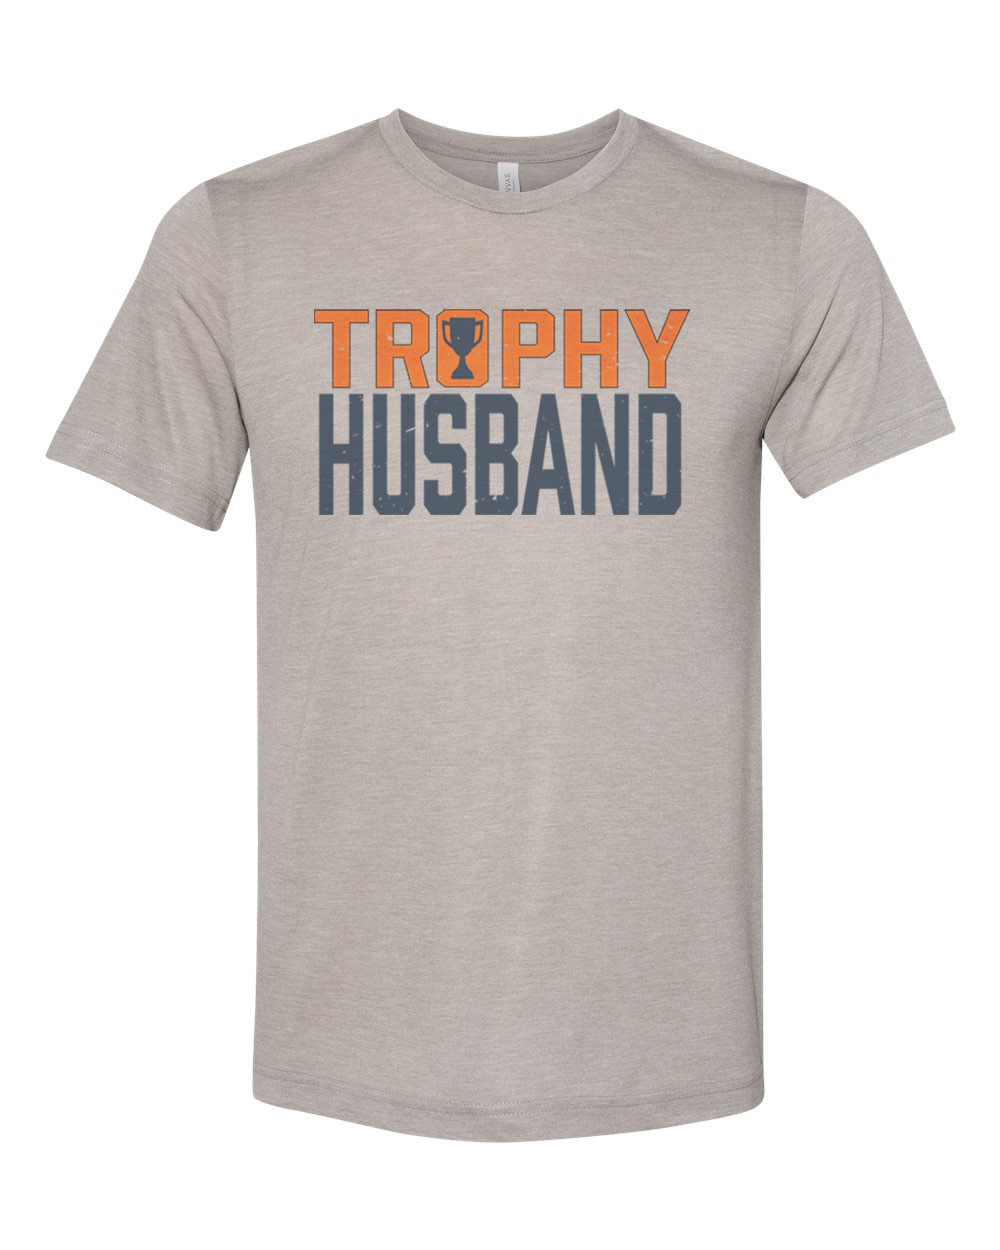 Trophy Husband Shirt, Gift For Him, Hubby Shirt, Trophy Husband, Father's Day Gift, Gift For Husband, Funny Husband Shirt, Husband Gift, Heather Stone, XL - image 1 of 1